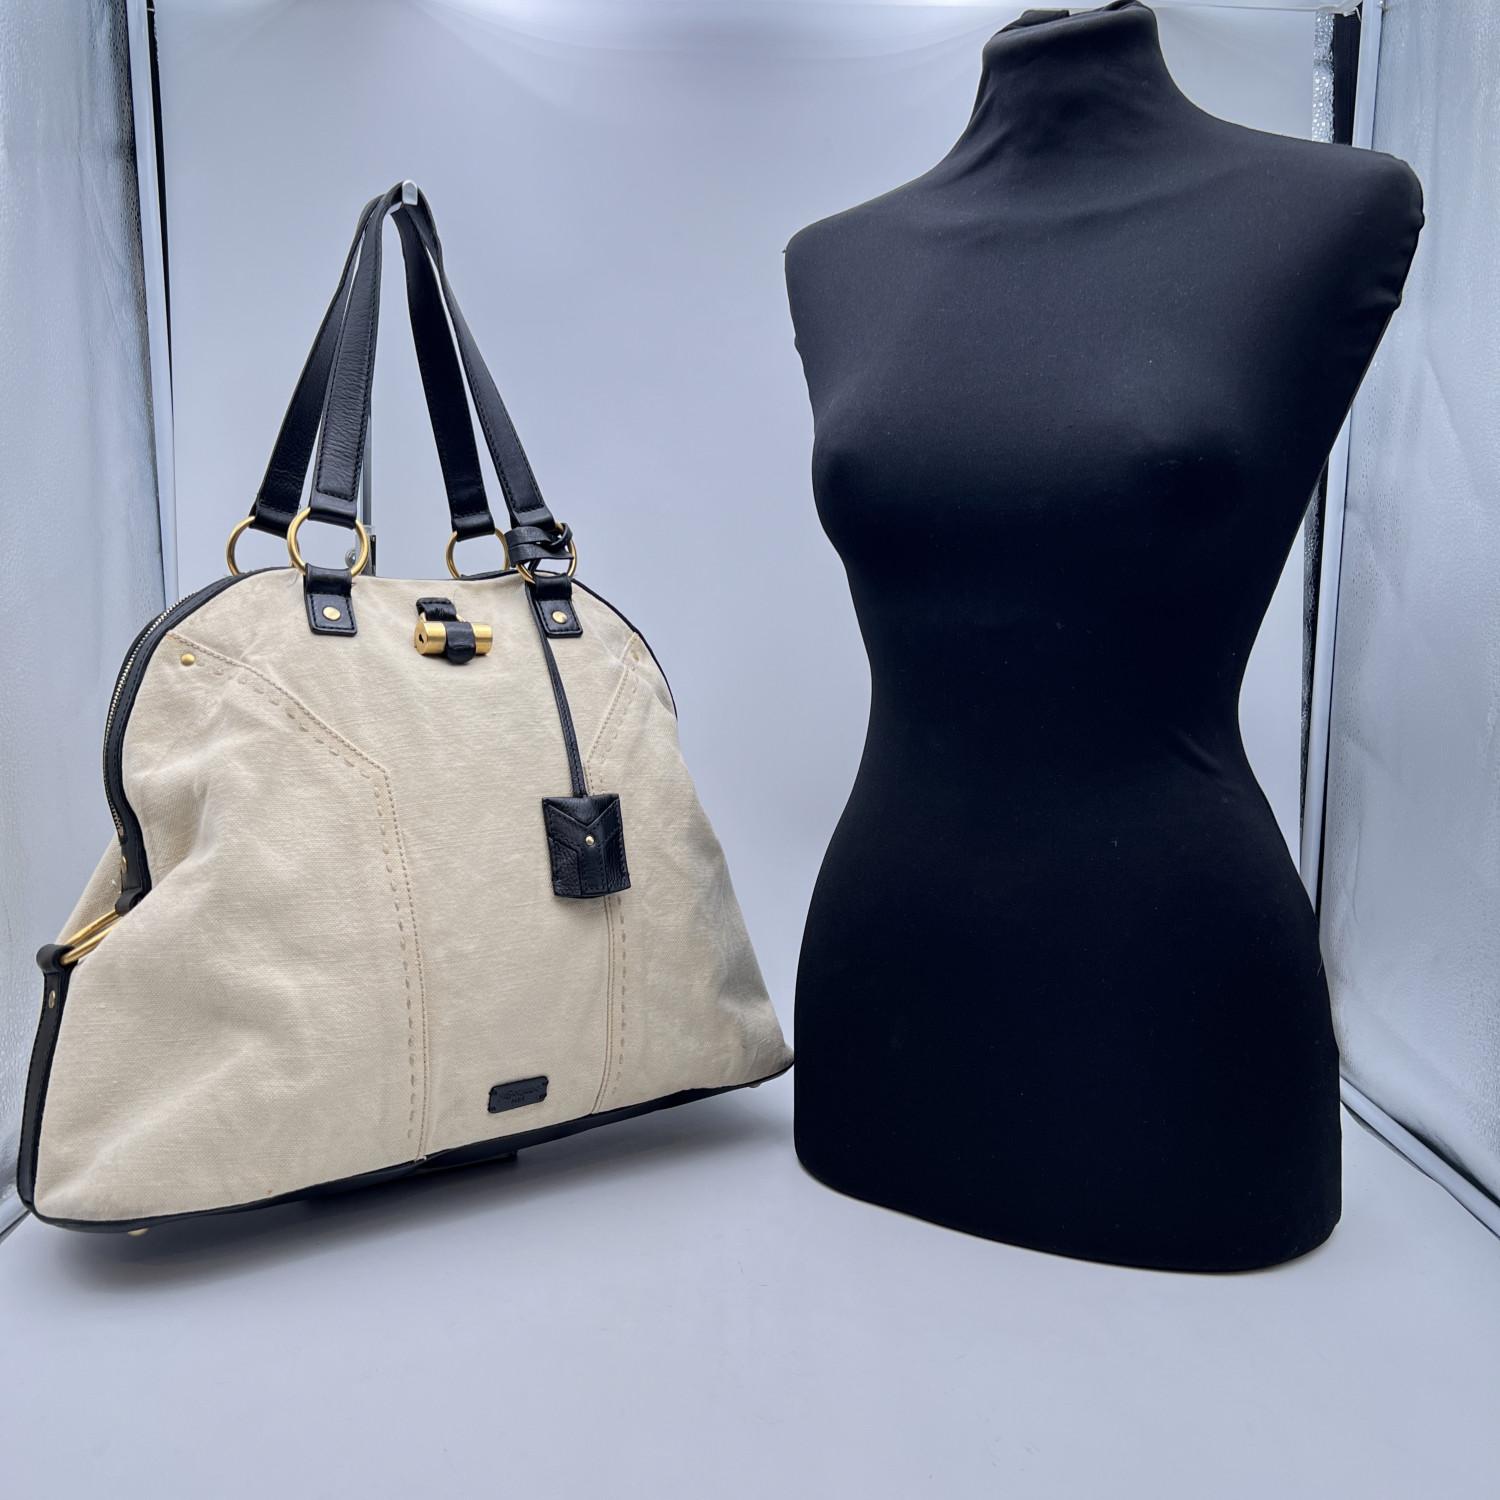 Iconic YVES SAINT LAURENT 'Large Muse bag' in beige canvas with black leather trim and handles. The bag features gold metal hardware, whip stitching and the iconic Muse padlock detailing on the front (Keys are included). The upper zipper closure